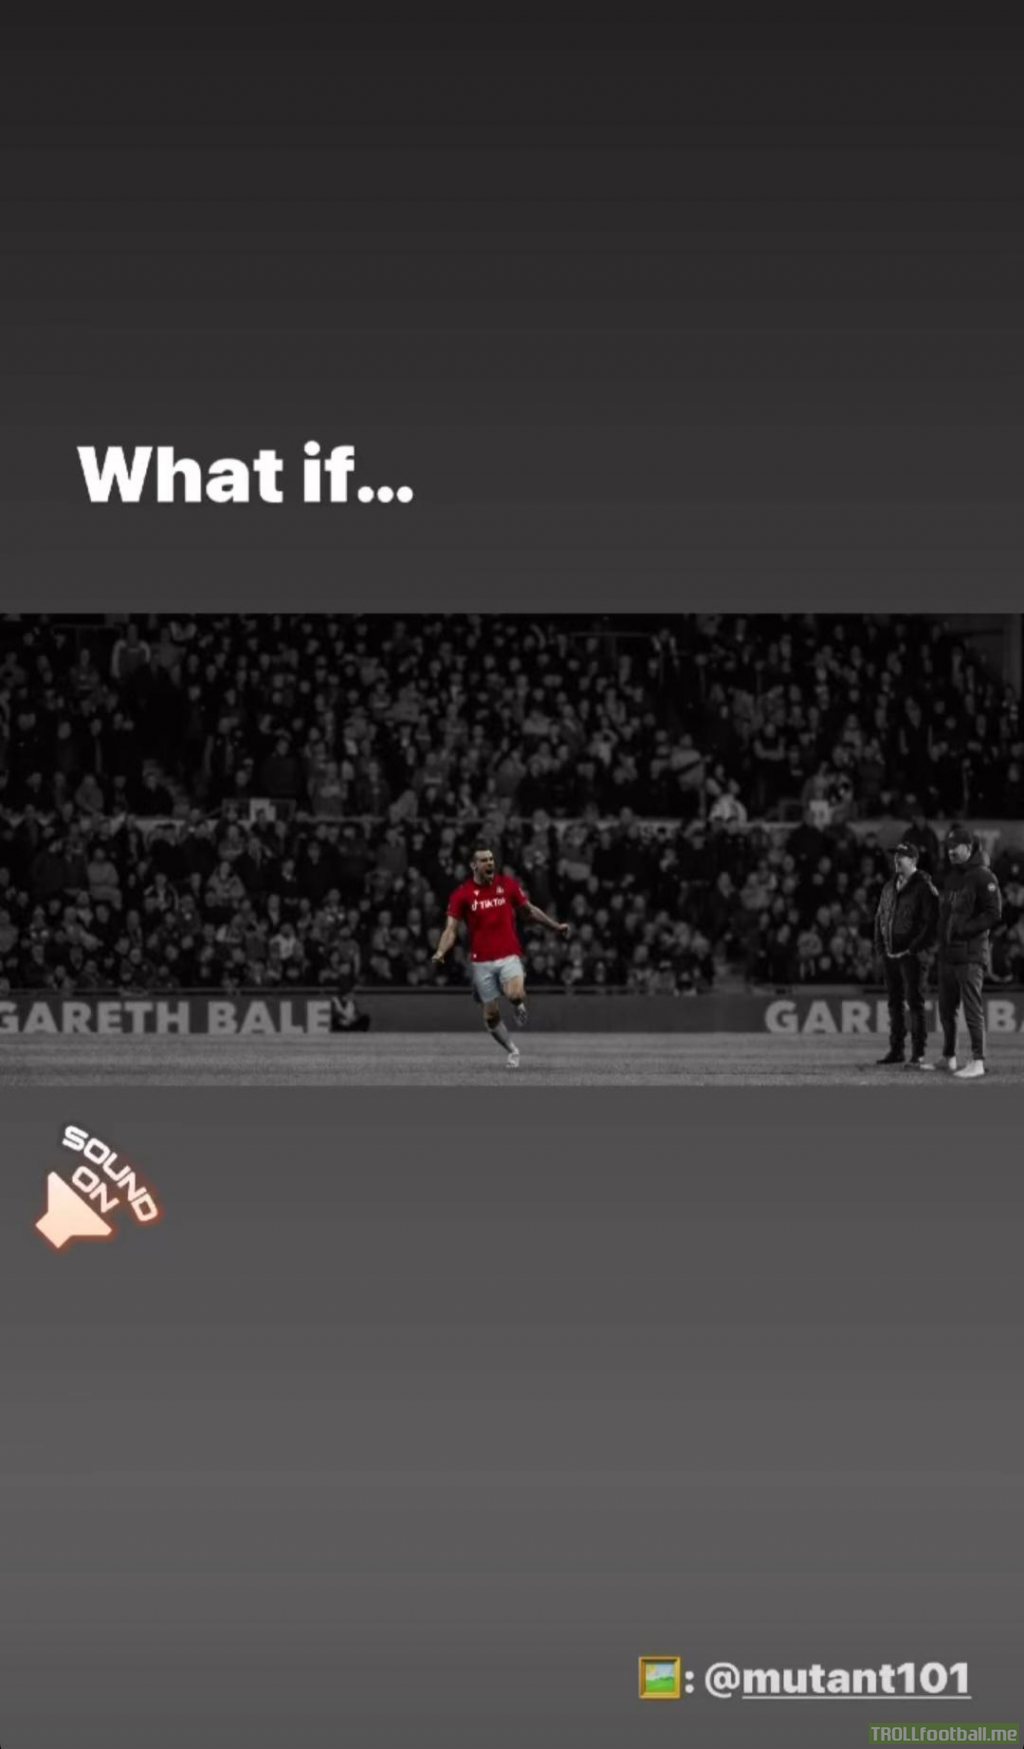 Ryan Reynolds on his IG story hinting at a possible Gareth Bale signing